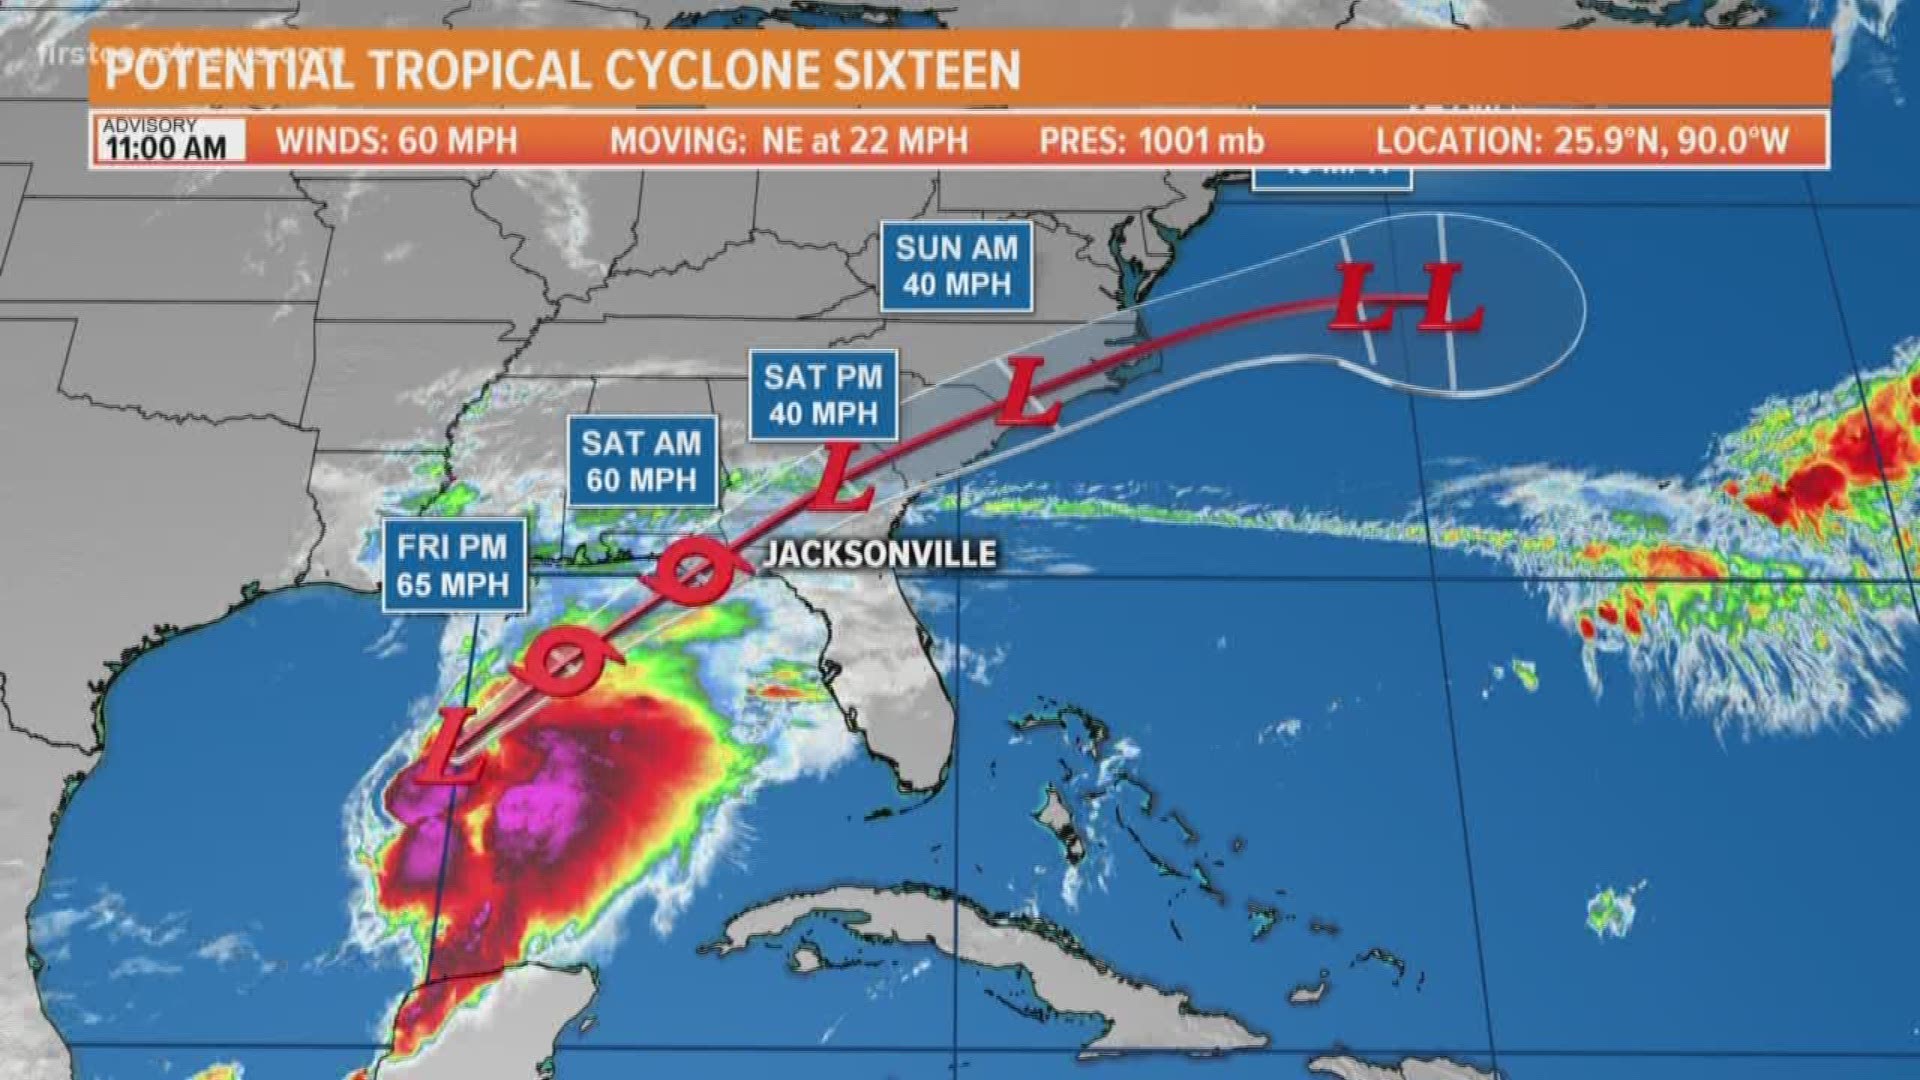 Potential Tropical Cyclone Sixteen, soon to be named "Nestor" is organizing in the Gulf and is headed our way. The storm surge threat will be on the Gulf Coast.